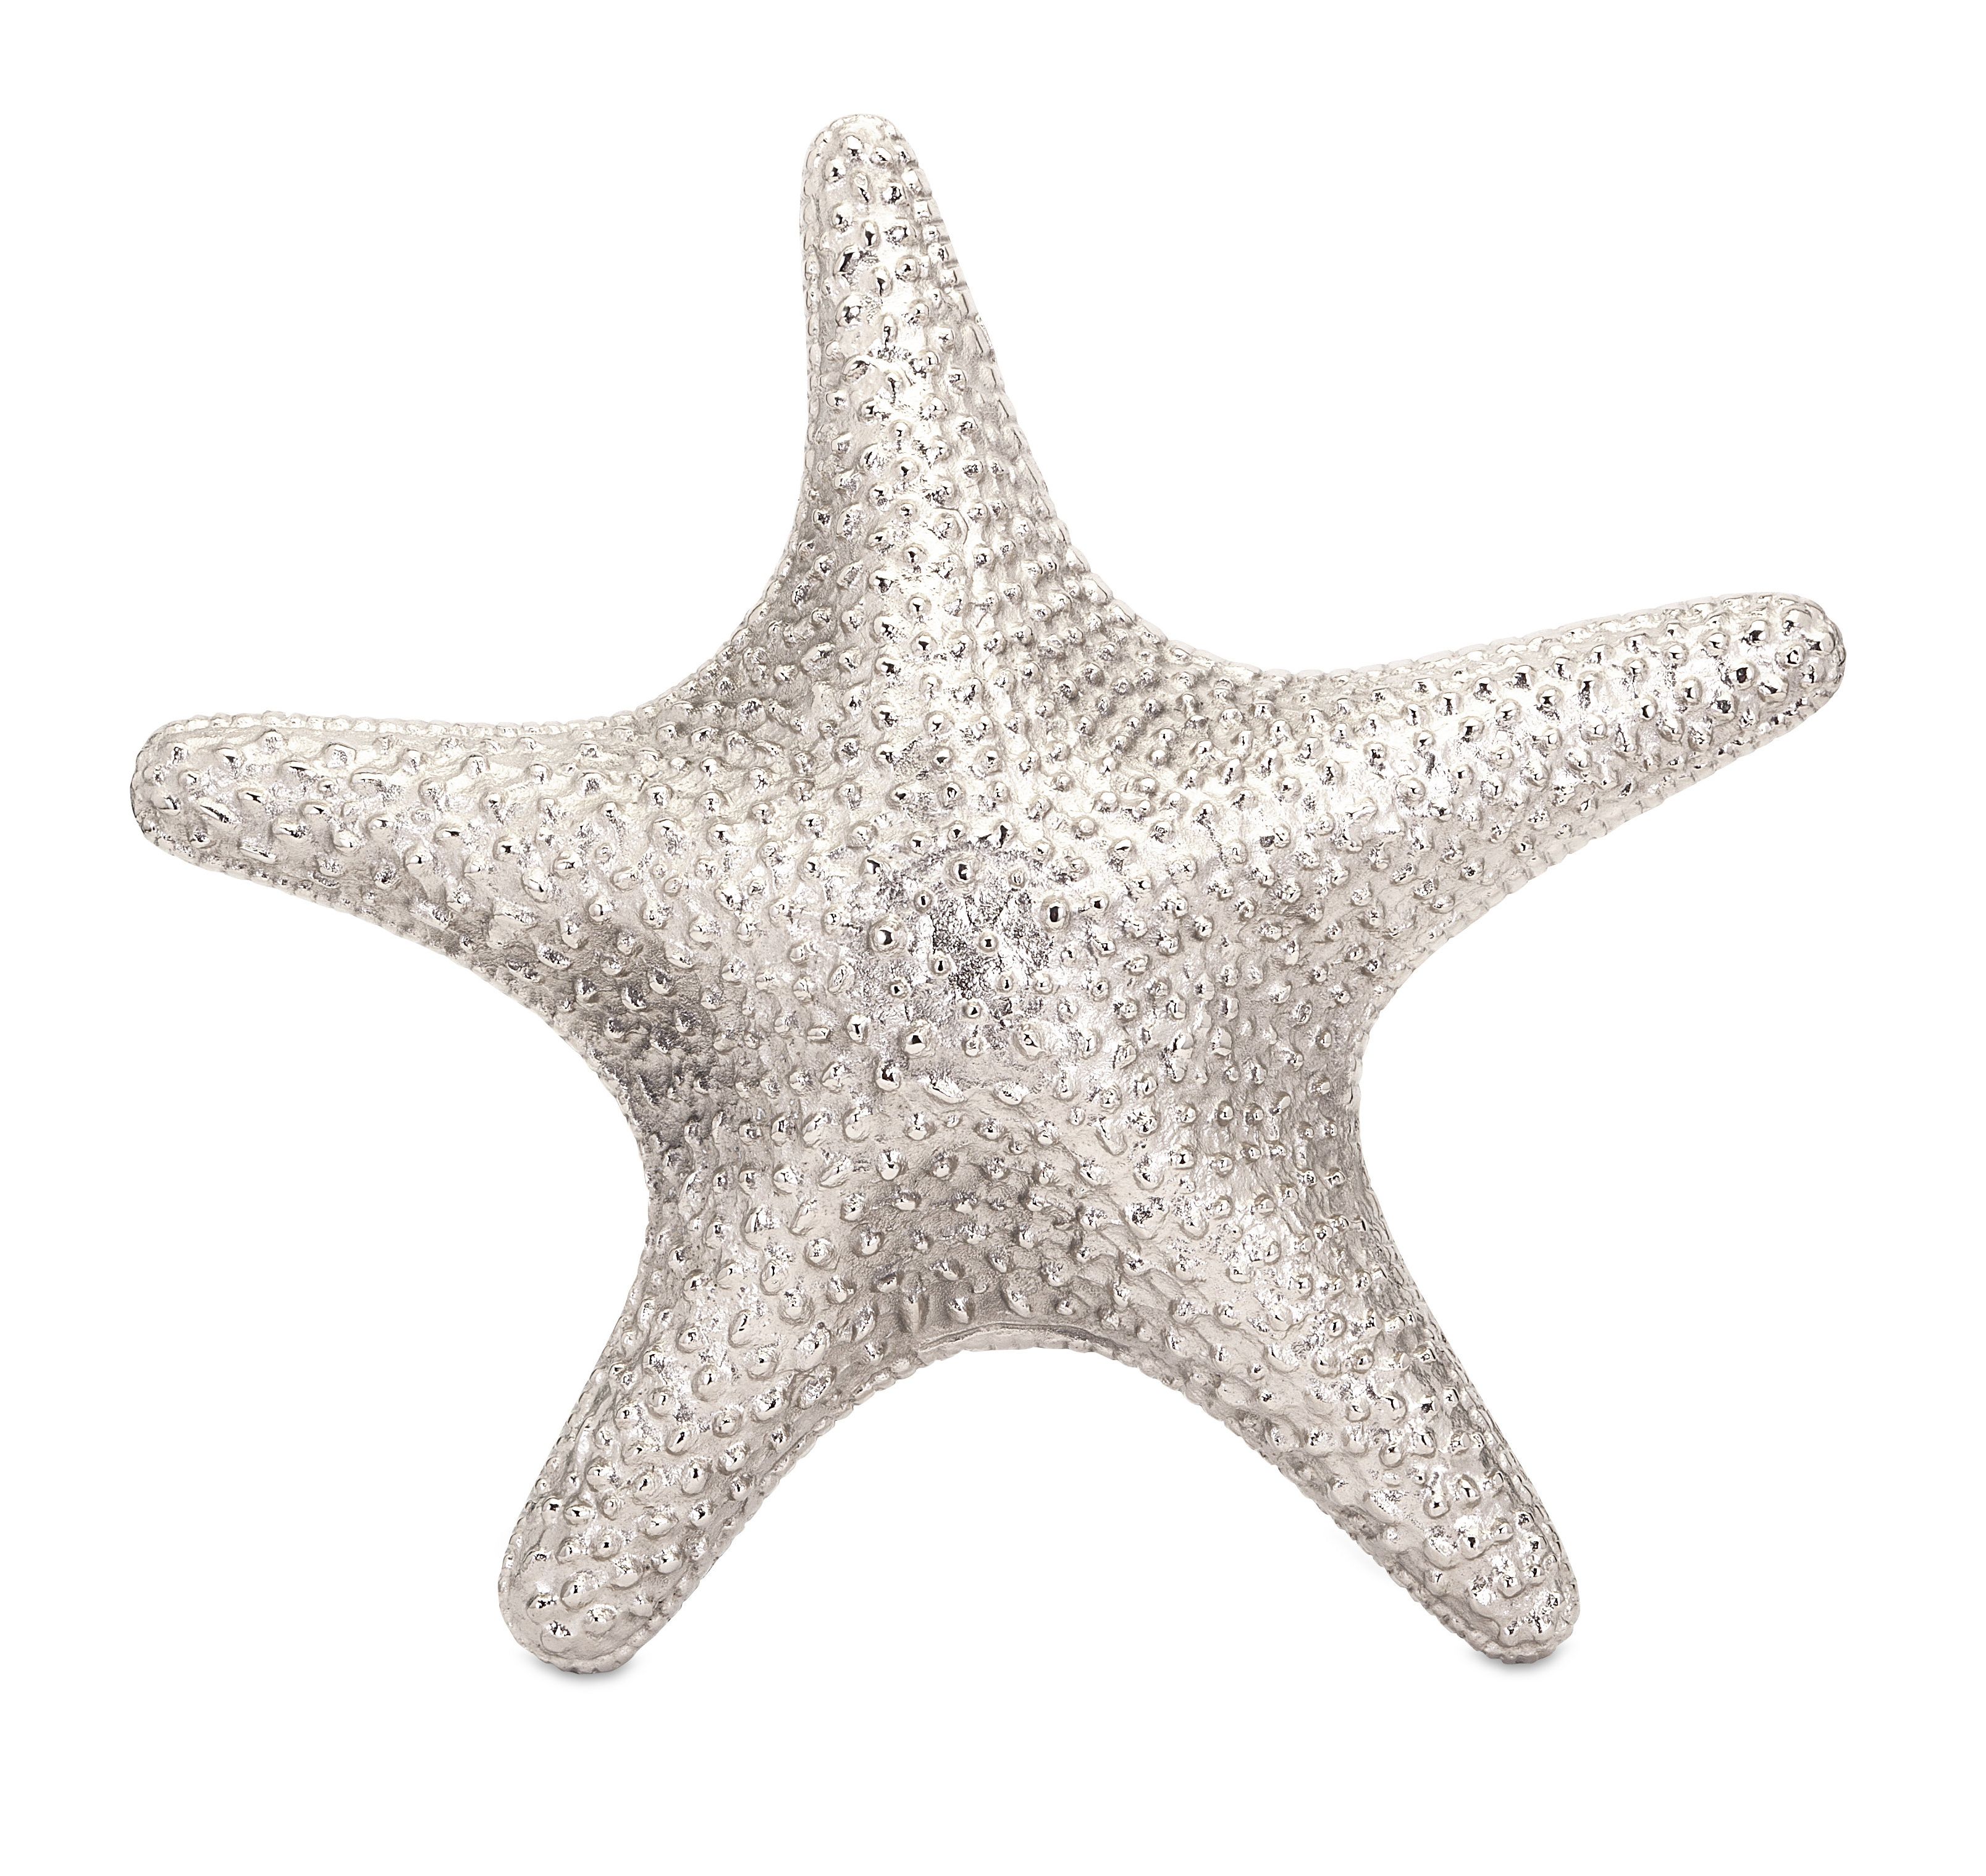 Wayfair With Favorite Yelton 3 Piece Starfish Wall Decor Sets (View 8 of 20)